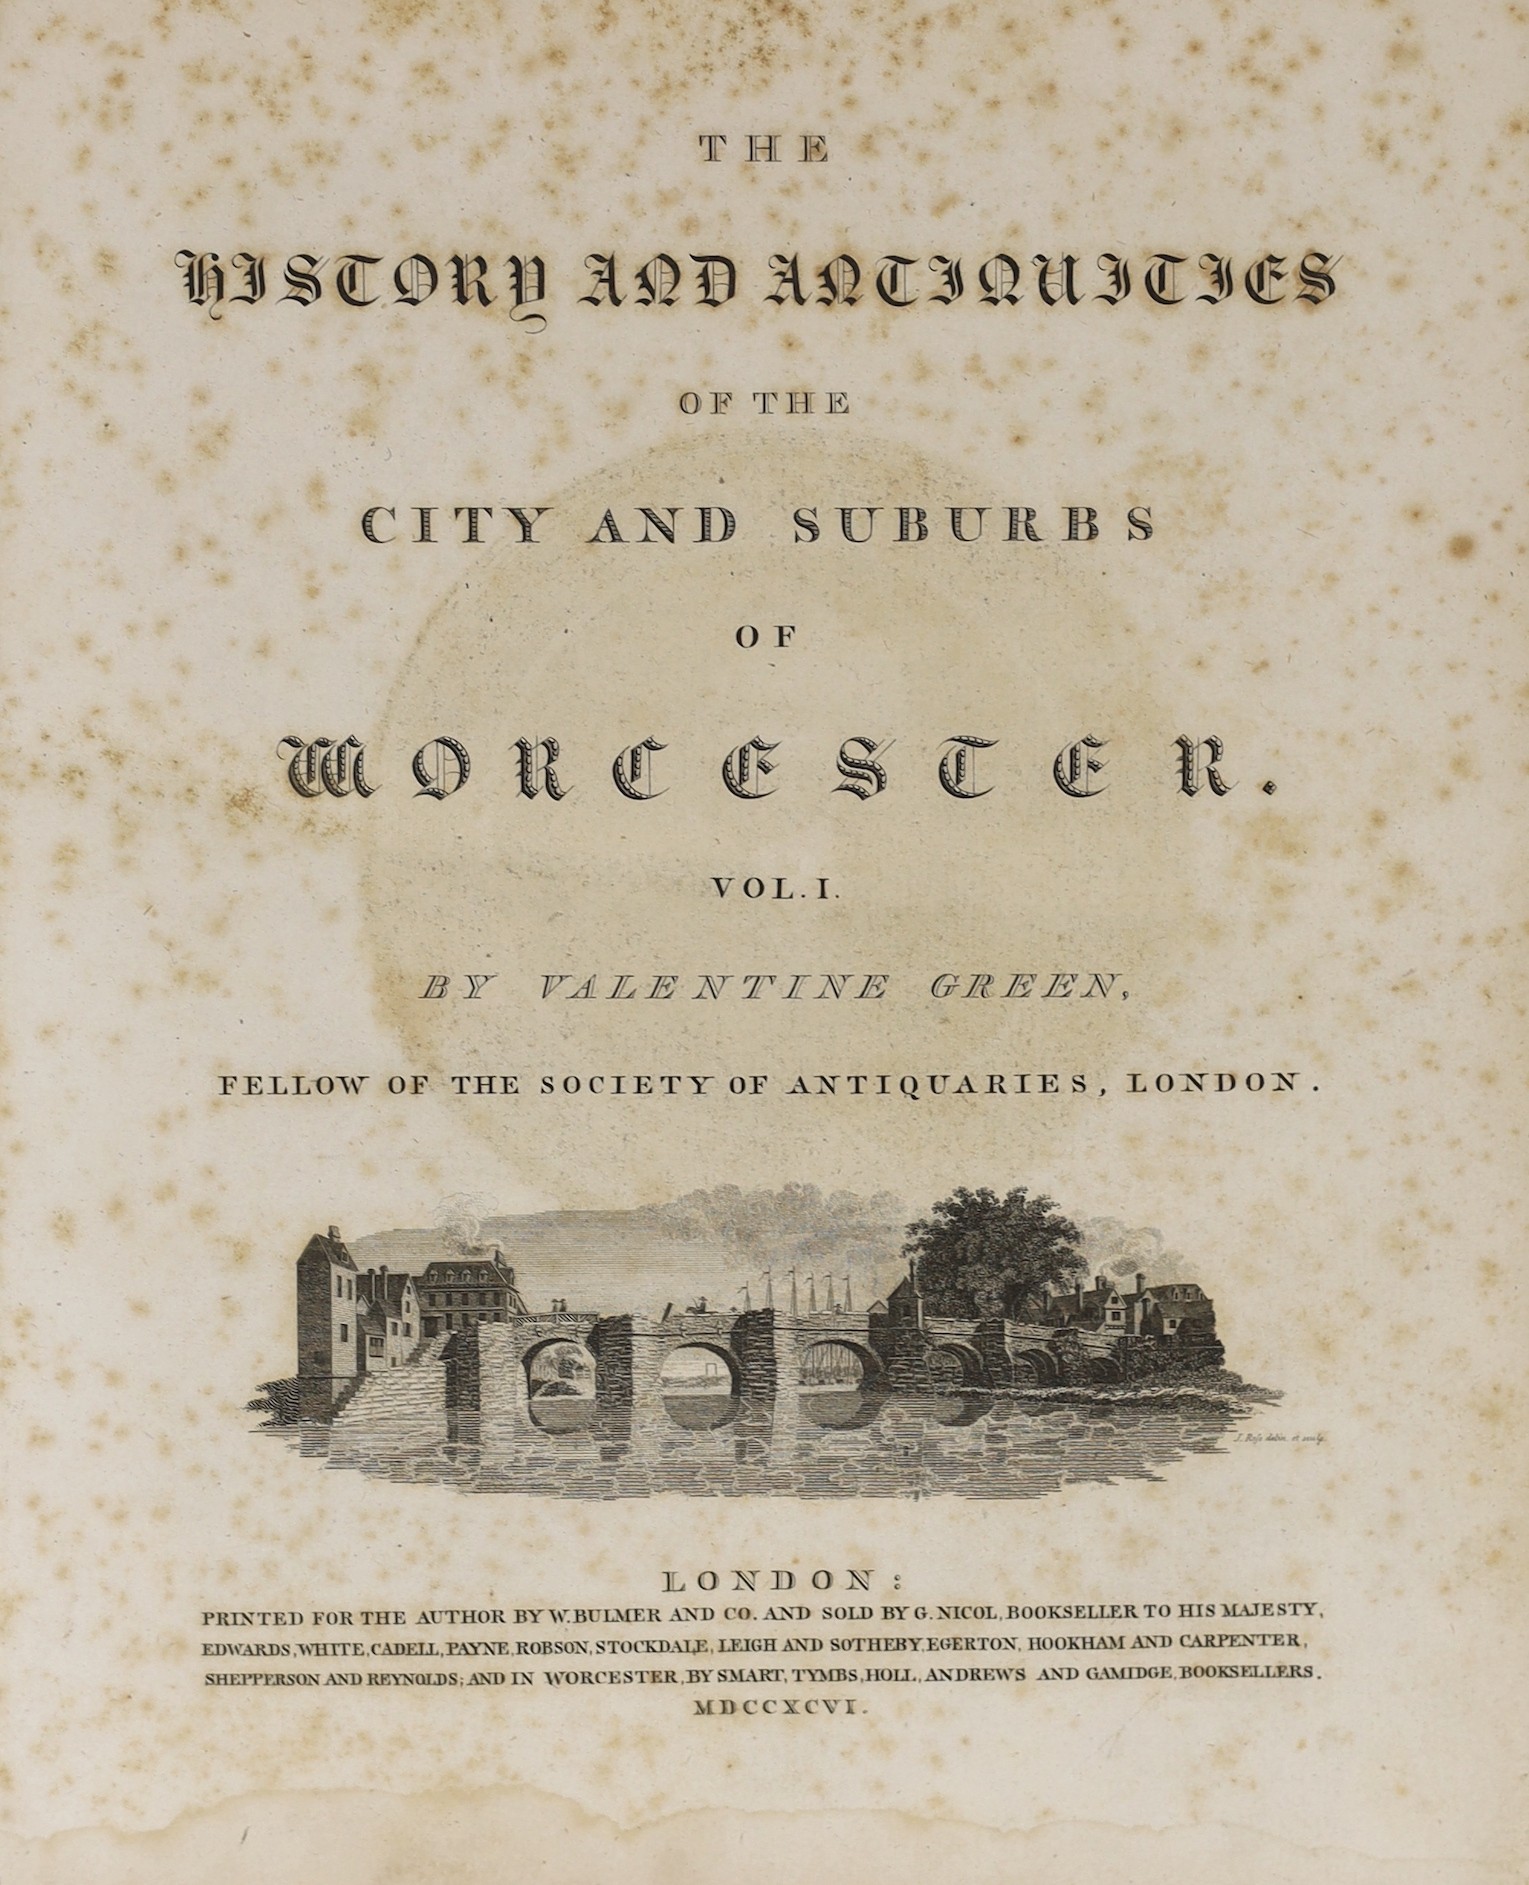 WORCS: Green, Valentine - The History and Antiquities of the City and Suburbs of Worcester. 2 vols. pictorial engraved titles, portrait, folded plan and 23 plates (2 d-page), subscribers list; old half calf and marbled b